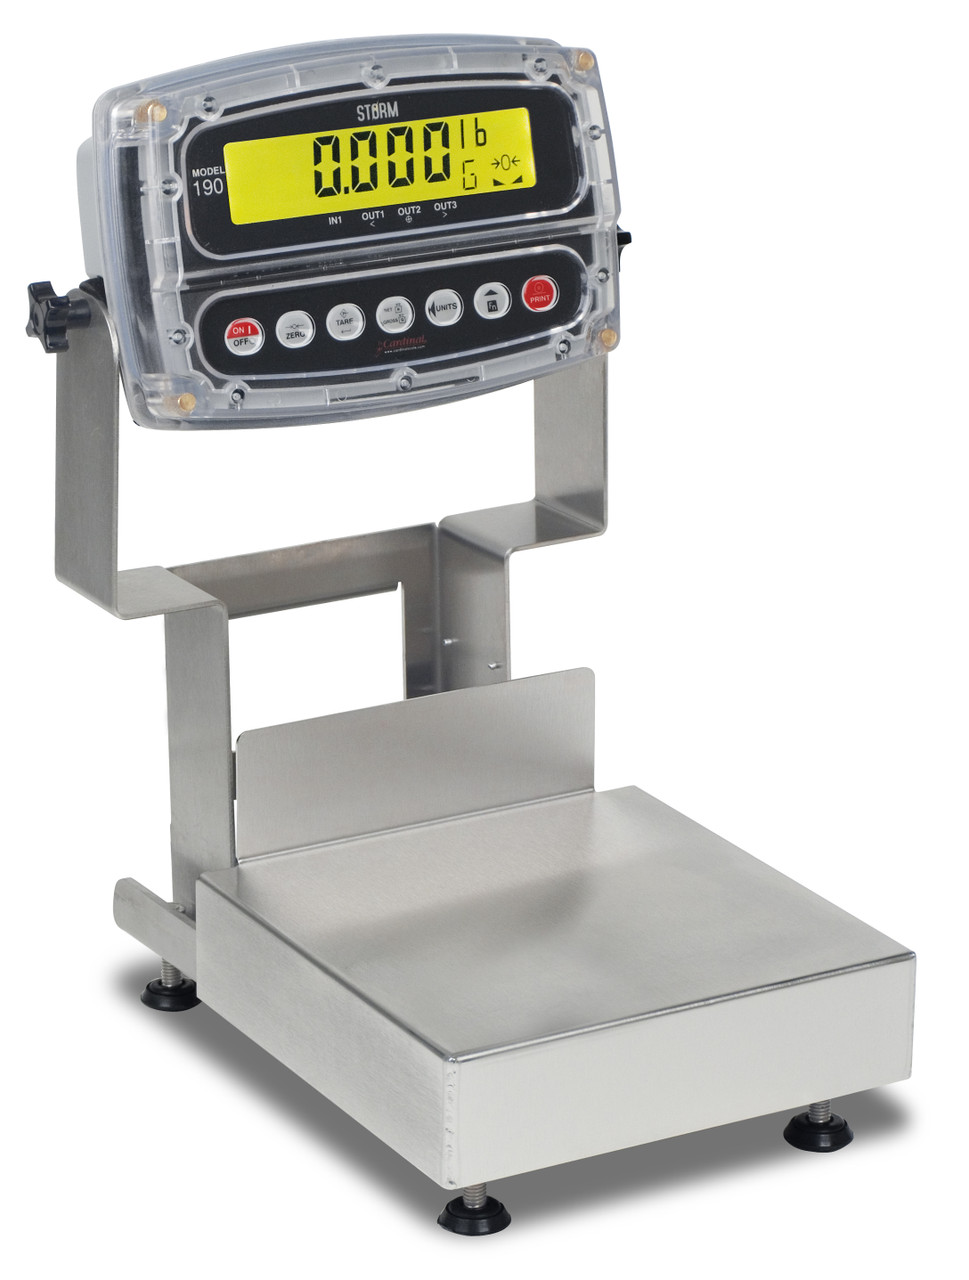 Cardinal Detecto 15 Kg Electronic Bench Scale 8" x 8" Stainless Steel Washdown 190 Indicator, Model# CA8-15KGW-190